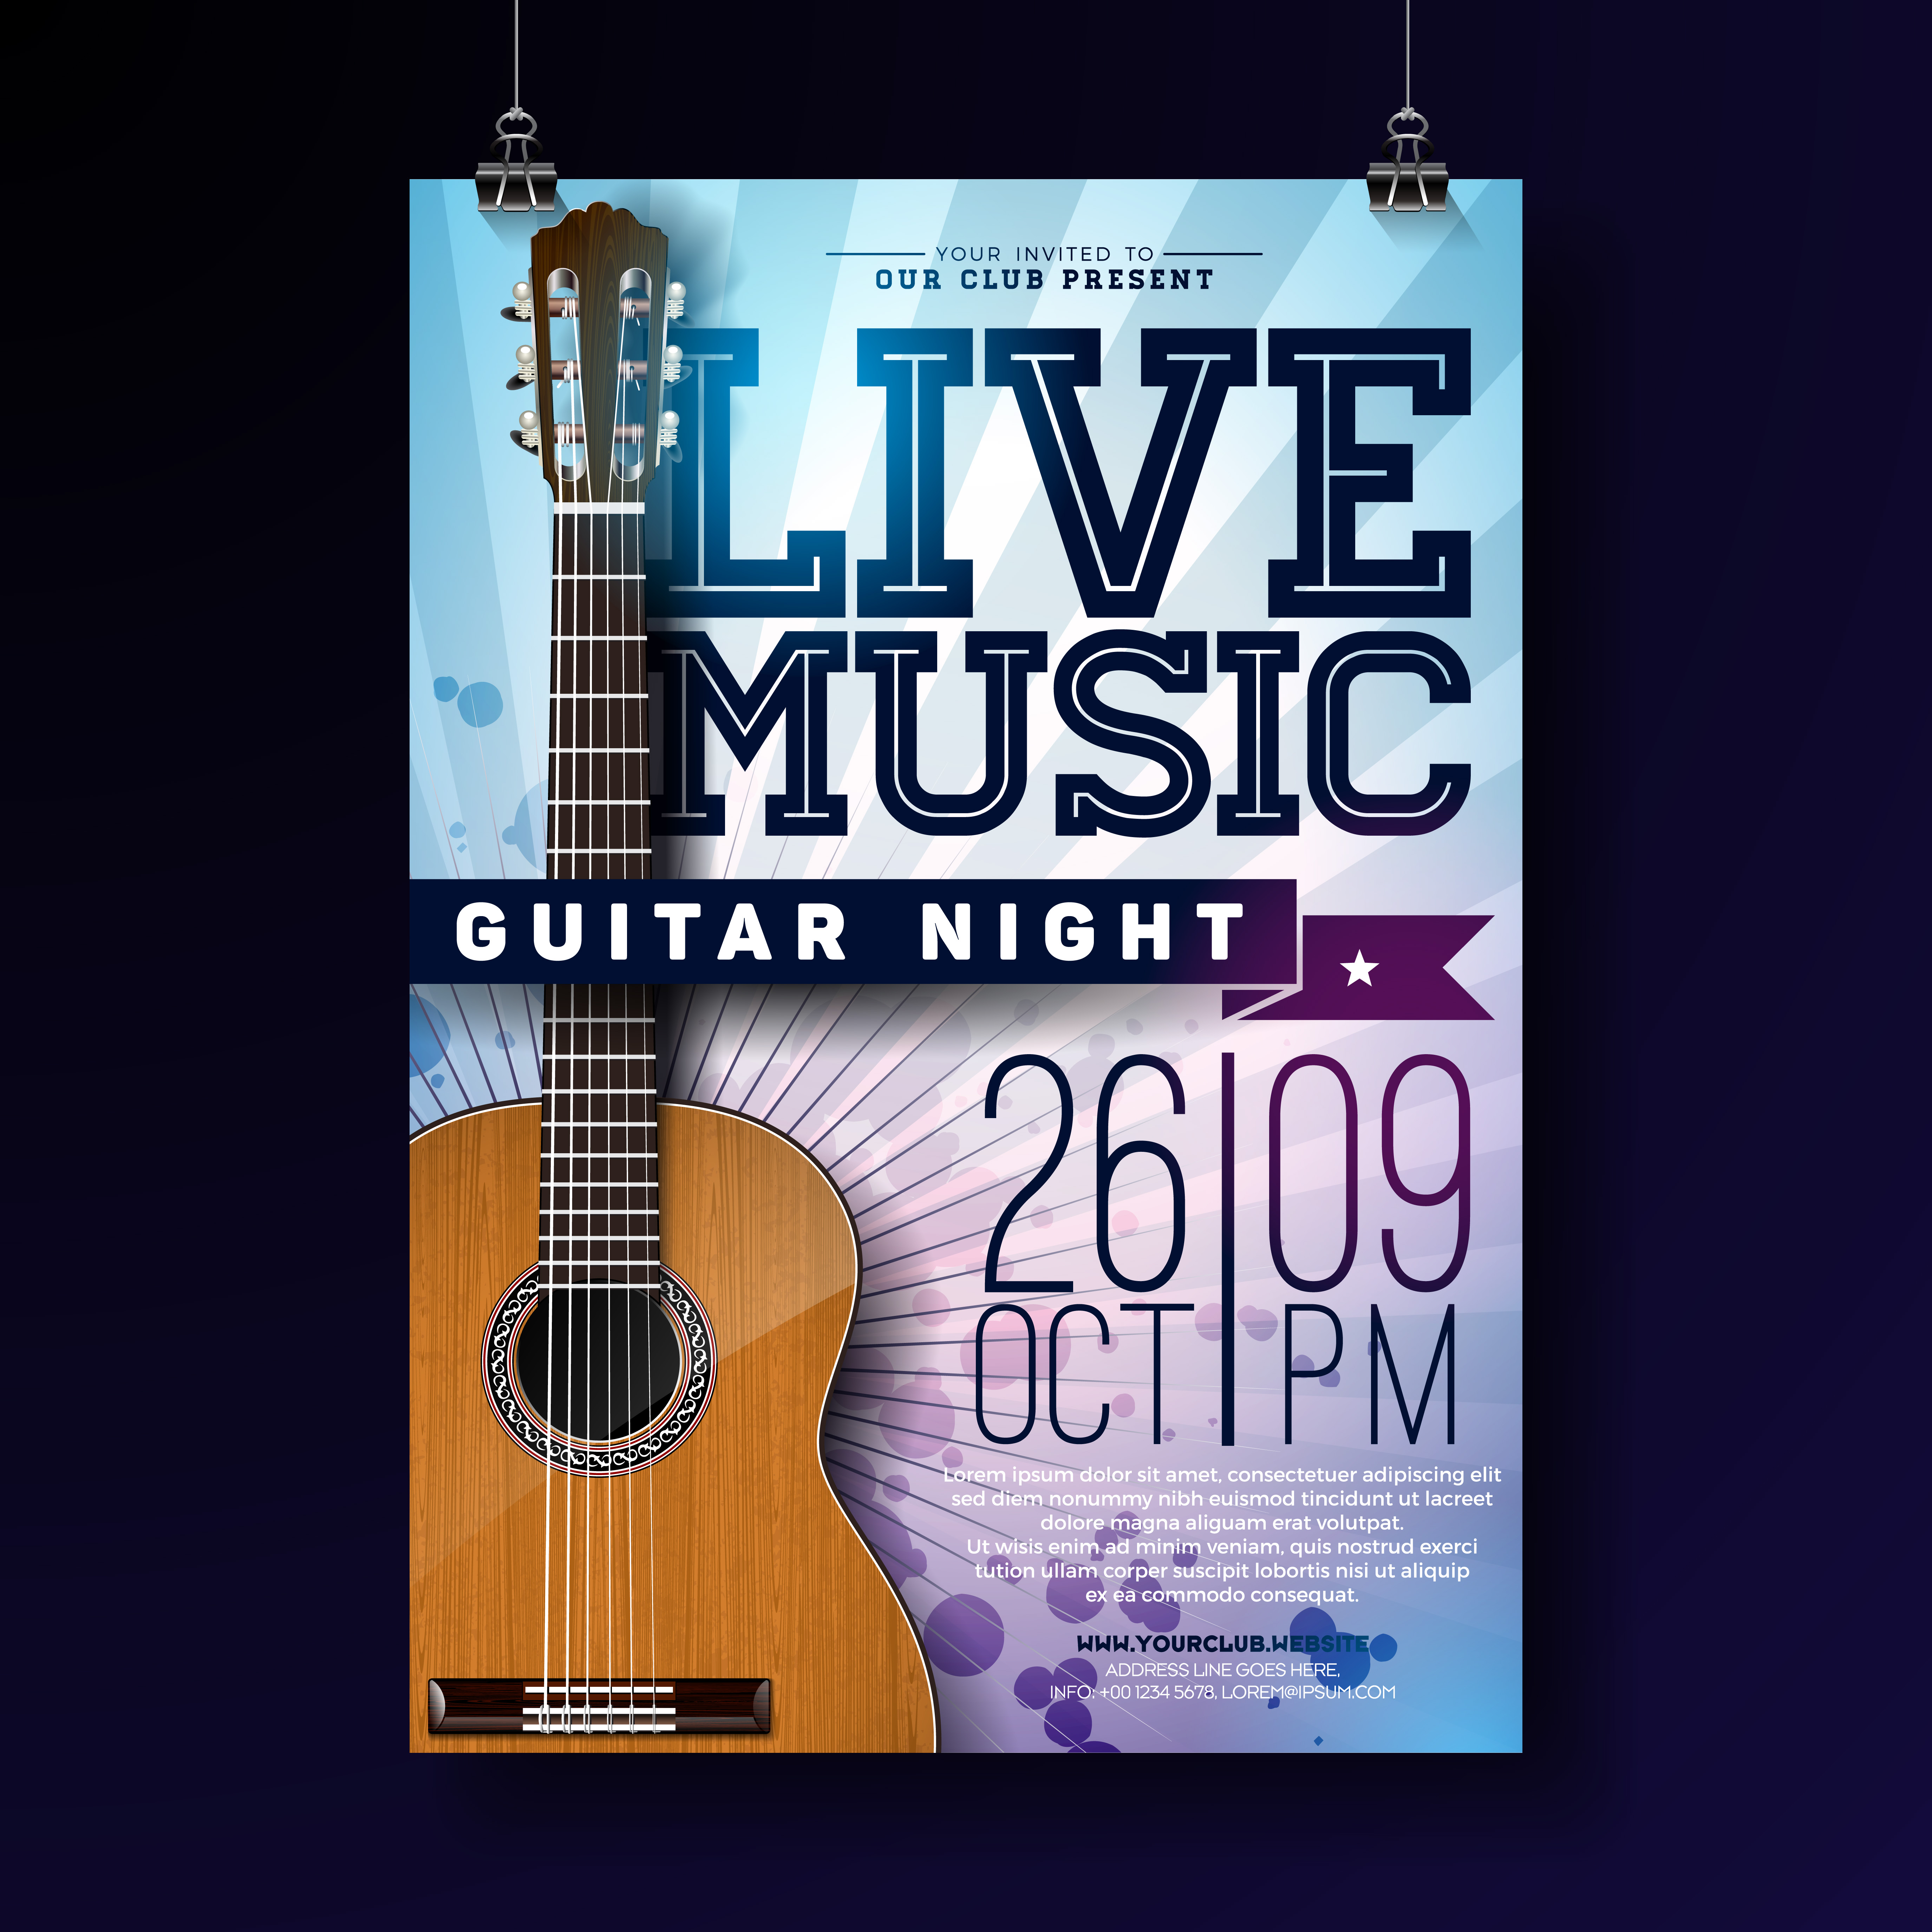 Live music flyer design with acoustic guitar on grunge background